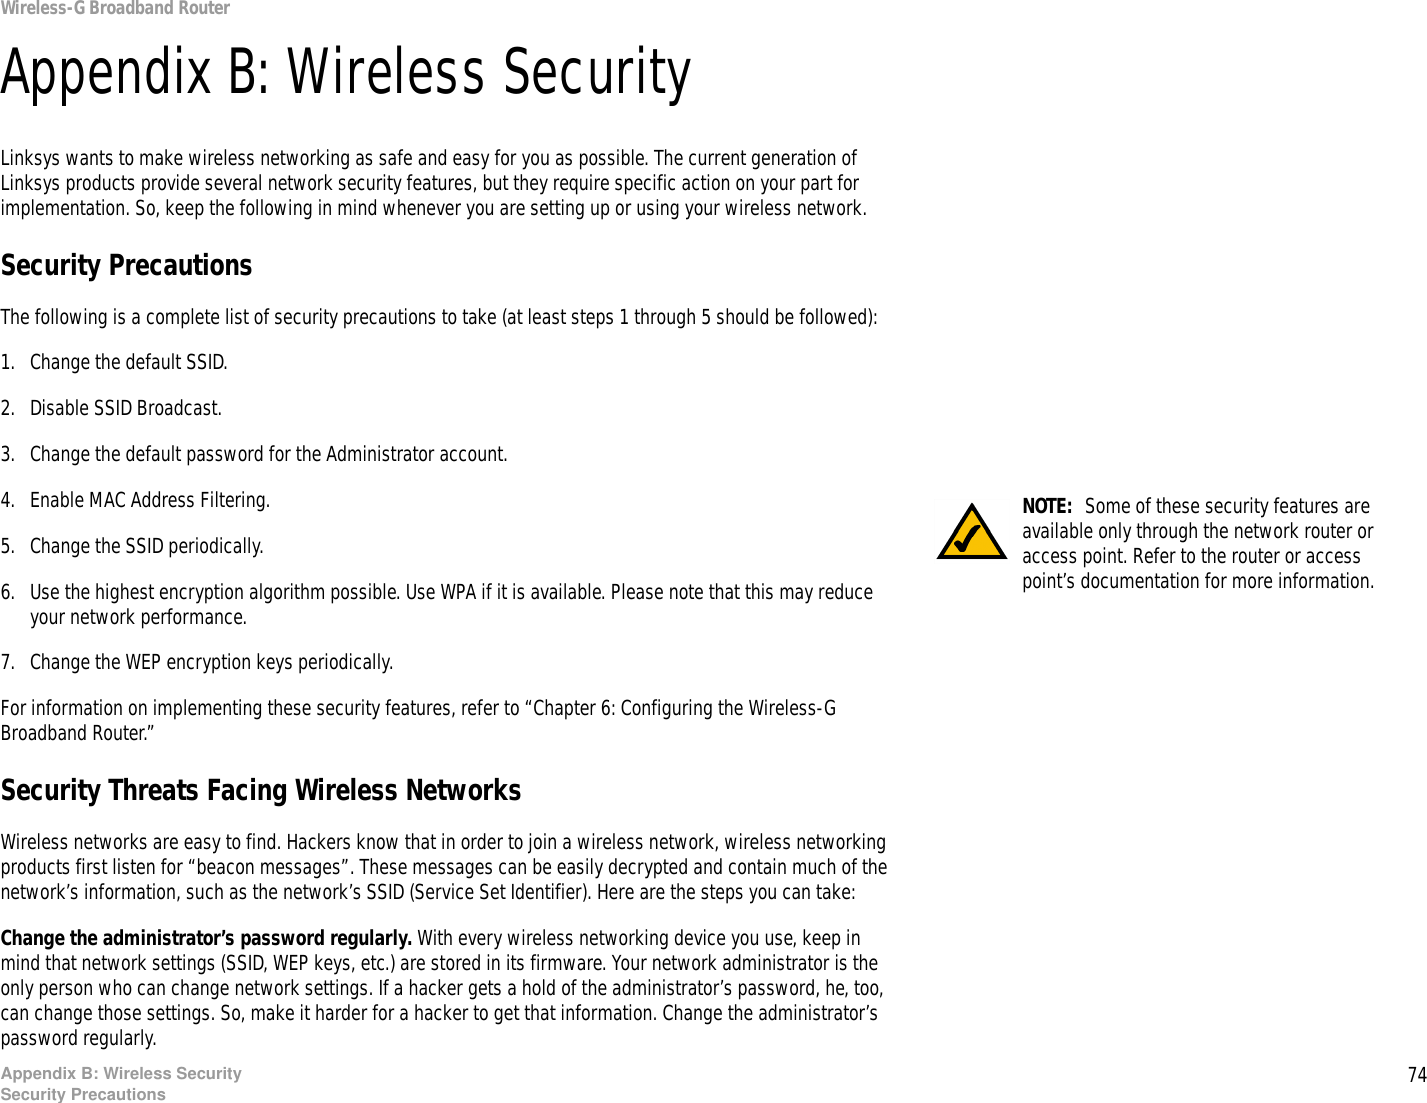 74Appendix B: Wireless SecuritySecurity PrecautionsWireless-G Broadband RouterAppendix B: Wireless SecurityLinksys wants to make wireless networking as safe and easy for you as possible. The current generation of Linksys products provide several network security features, but they require specific action on your part for implementation. So, keep the following in mind whenever you are setting up or using your wireless network.Security PrecautionsThe following is a complete list of security precautions to take (at least steps 1 through 5 should be followed):1. Change the default SSID. 2. Disable SSID Broadcast. 3. Change the default password for the Administrator account. 4. Enable MAC Address Filtering. 5. Change the SSID periodically. 6. Use the highest encryption algorithm possible. Use WPA if it is available. Please note that this may reduce your network performance. 7. Change the WEP encryption keys periodically. For information on implementing these security features, refer to “Chapter 6: Configuring the Wireless-G Broadband Router.”Security Threats Facing Wireless Networks Wireless networks are easy to find. Hackers know that in order to join a wireless network, wireless networking products first listen for “beacon messages”. These messages can be easily decrypted and contain much of the network’s information, such as the network’s SSID (Service Set Identifier). Here are the steps you can take:Change the administrator’s password regularly. With every wireless networking device you use, keep in mind that network settings (SSID, WEP keys, etc.) are stored in its firmware. Your network administrator is the only person who can change network settings. If a hacker gets a hold of the administrator’s password, he, too, can change those settings. So, make it harder for a hacker to get that information. Change the administrator’s password regularly.NOTE:  Some of these security features are available only through the network router or access point. Refer to the router or access point’s documentation for more information.